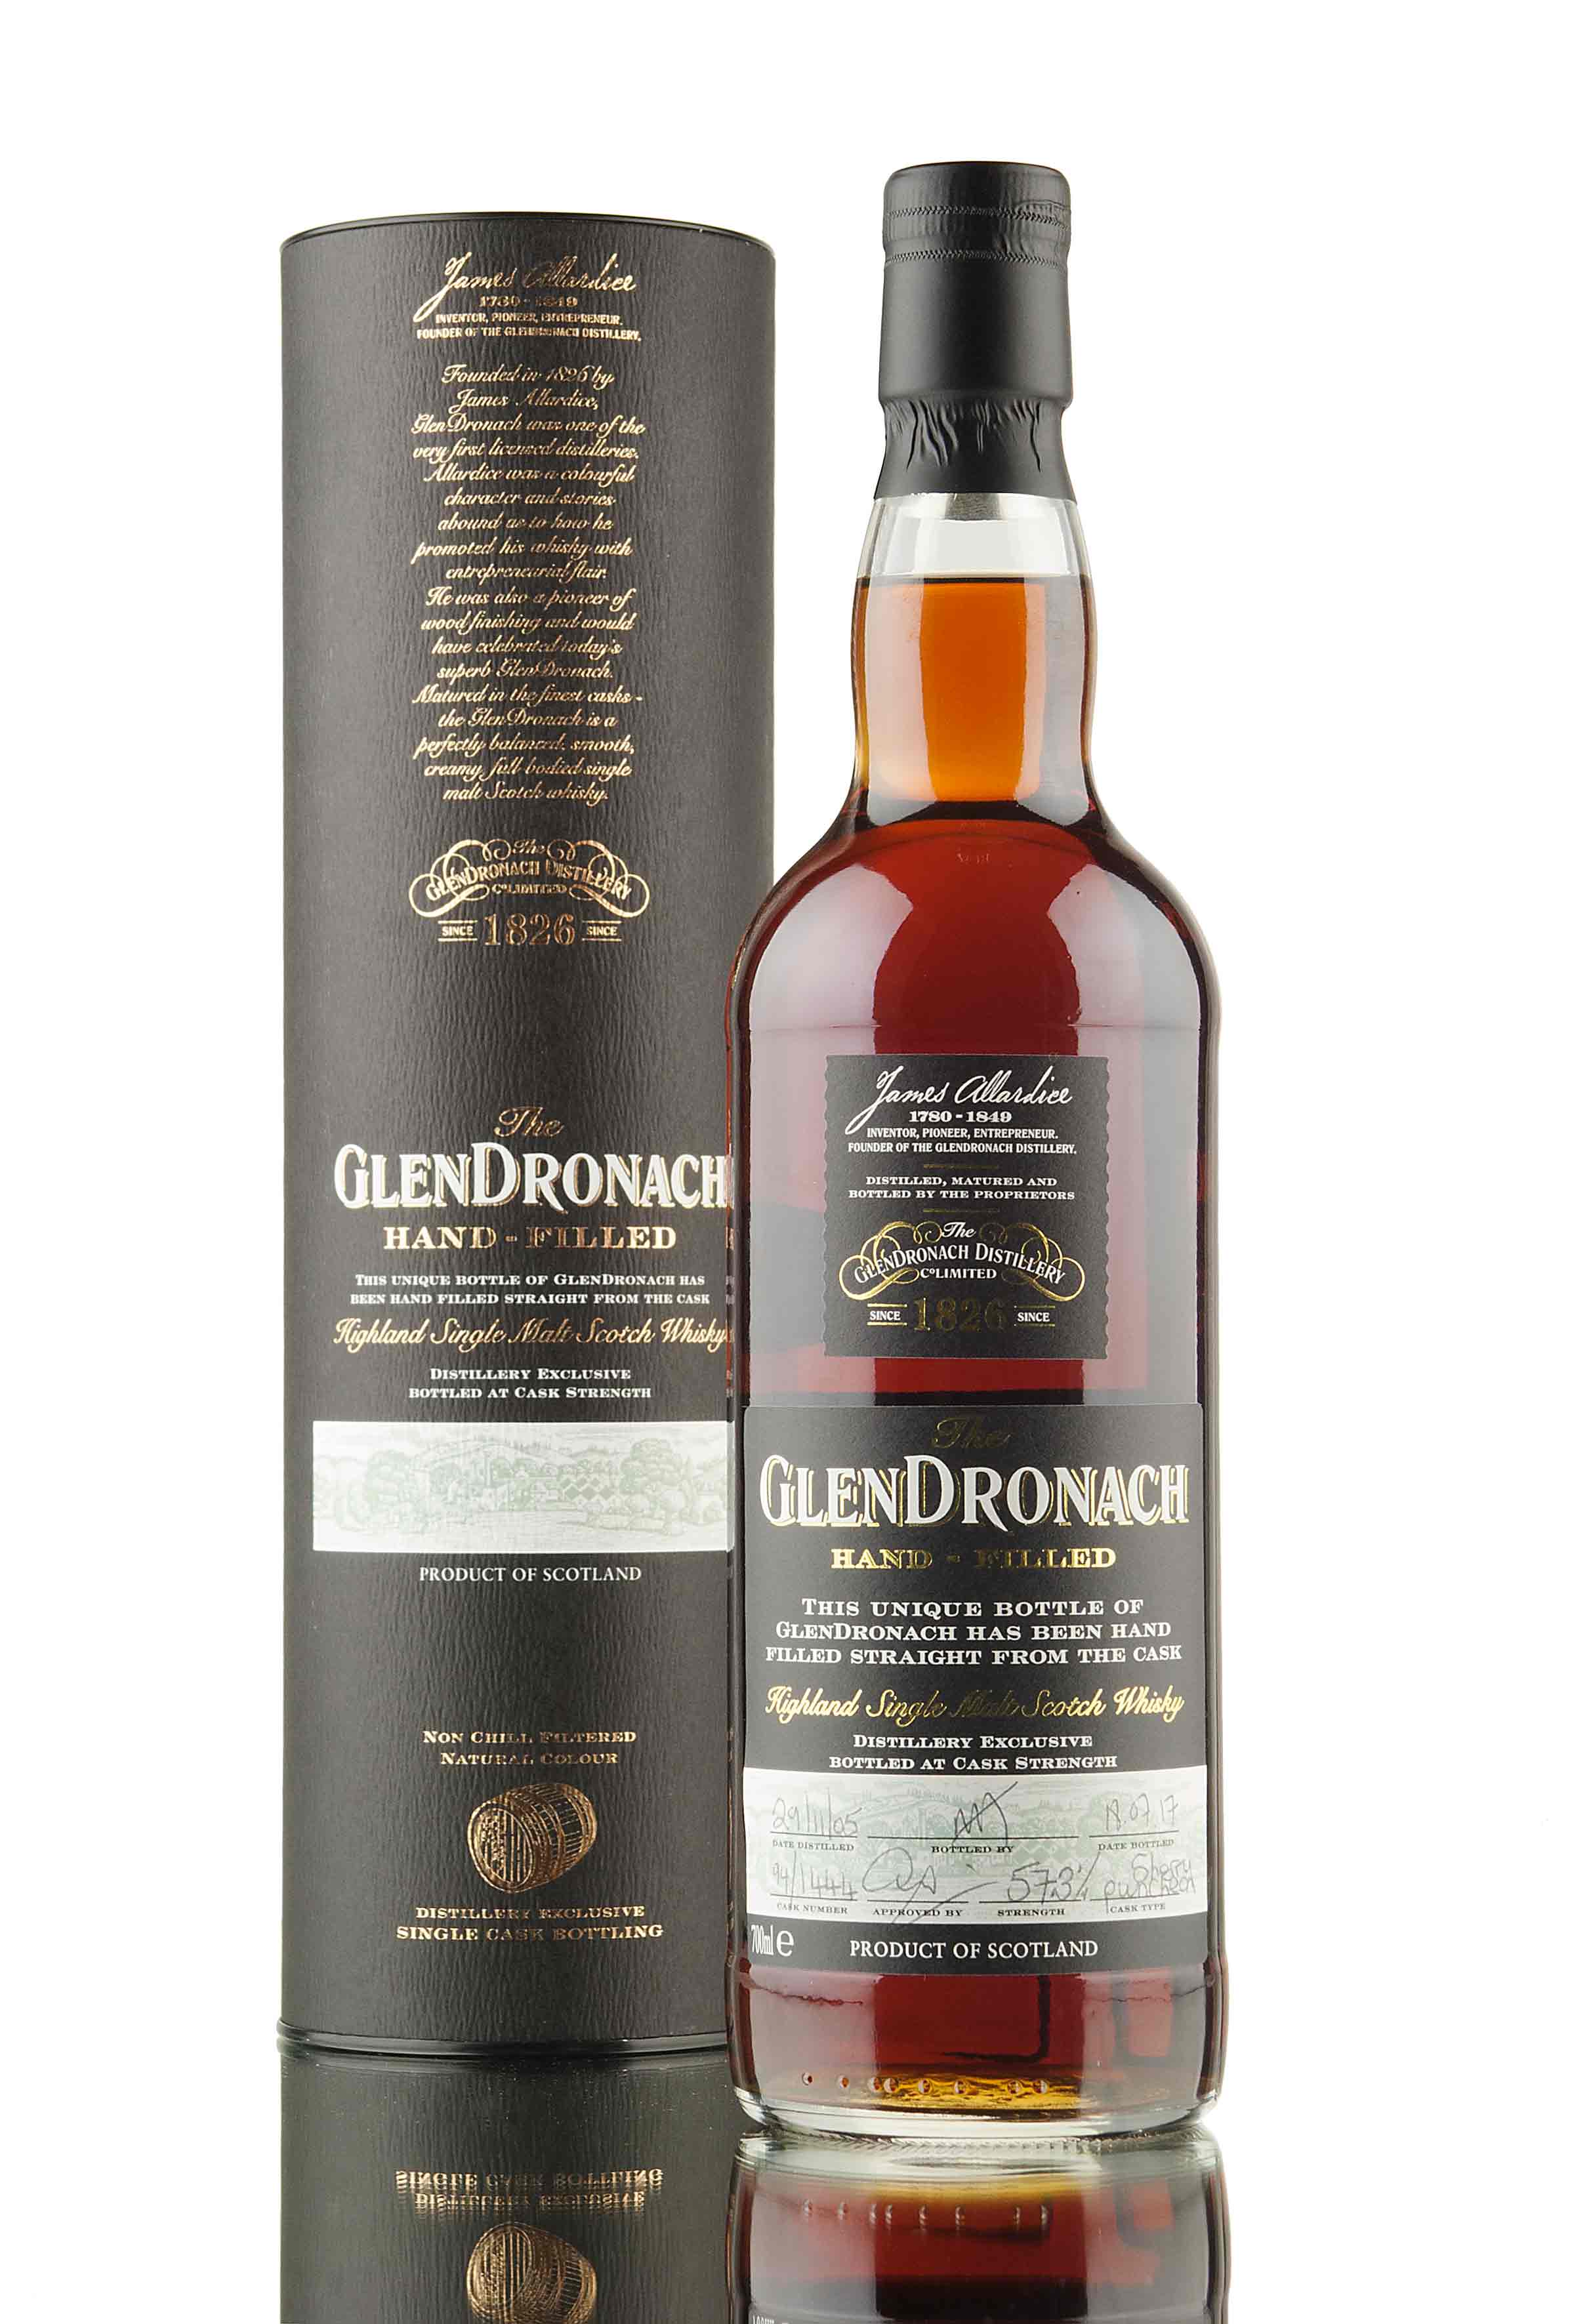 GlenDronach 11 Year Old - 2005 | Cask 1444 | Hand Filled